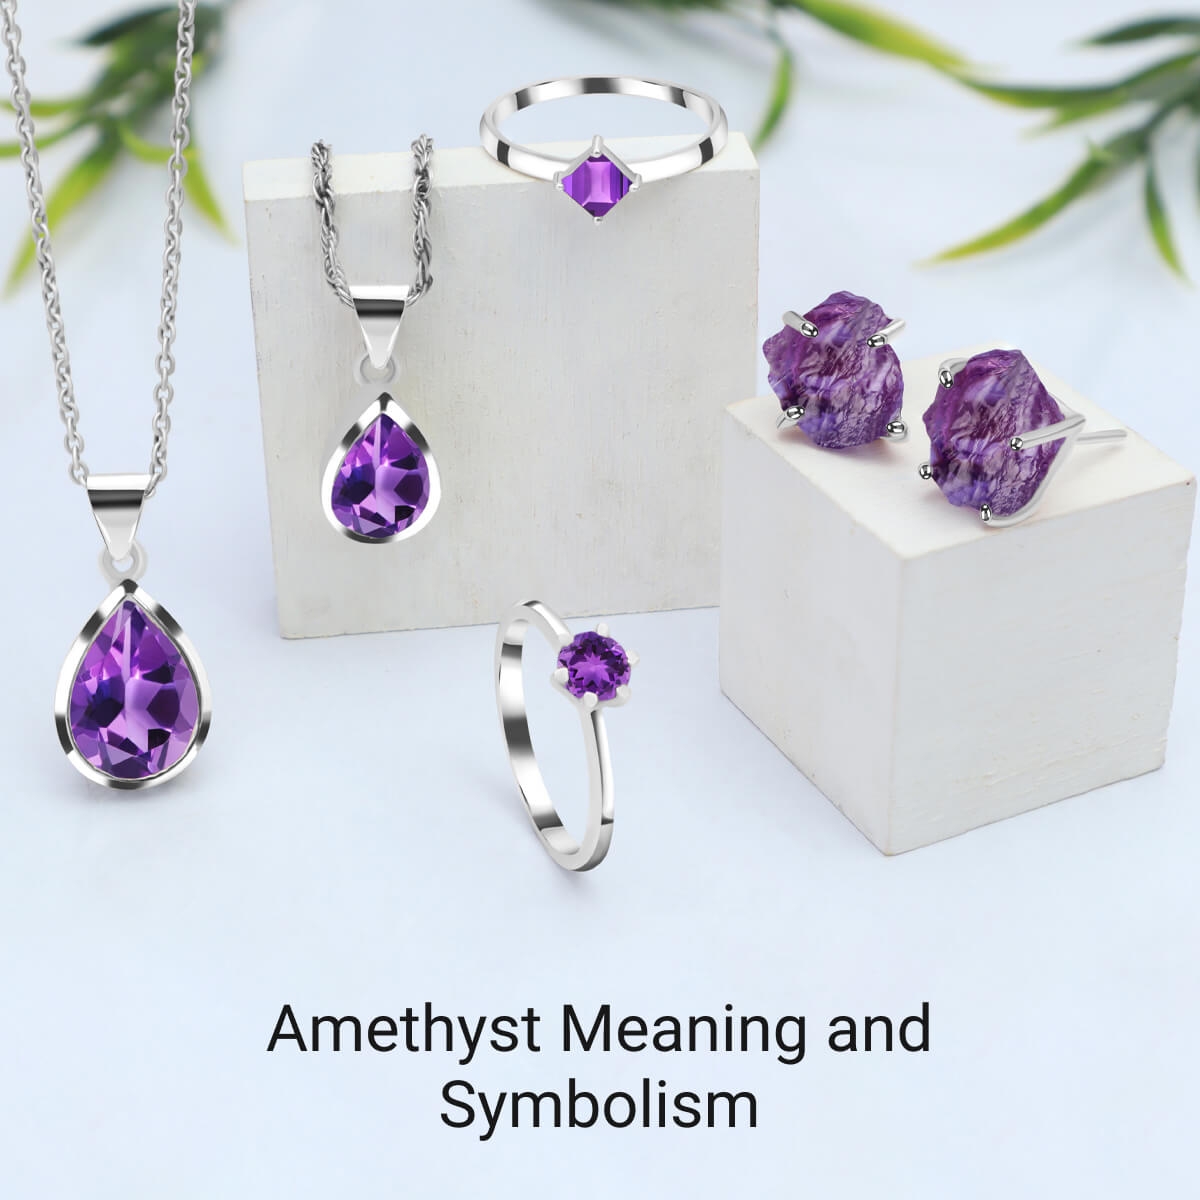 What is amethyst? It's meaning and symbolism